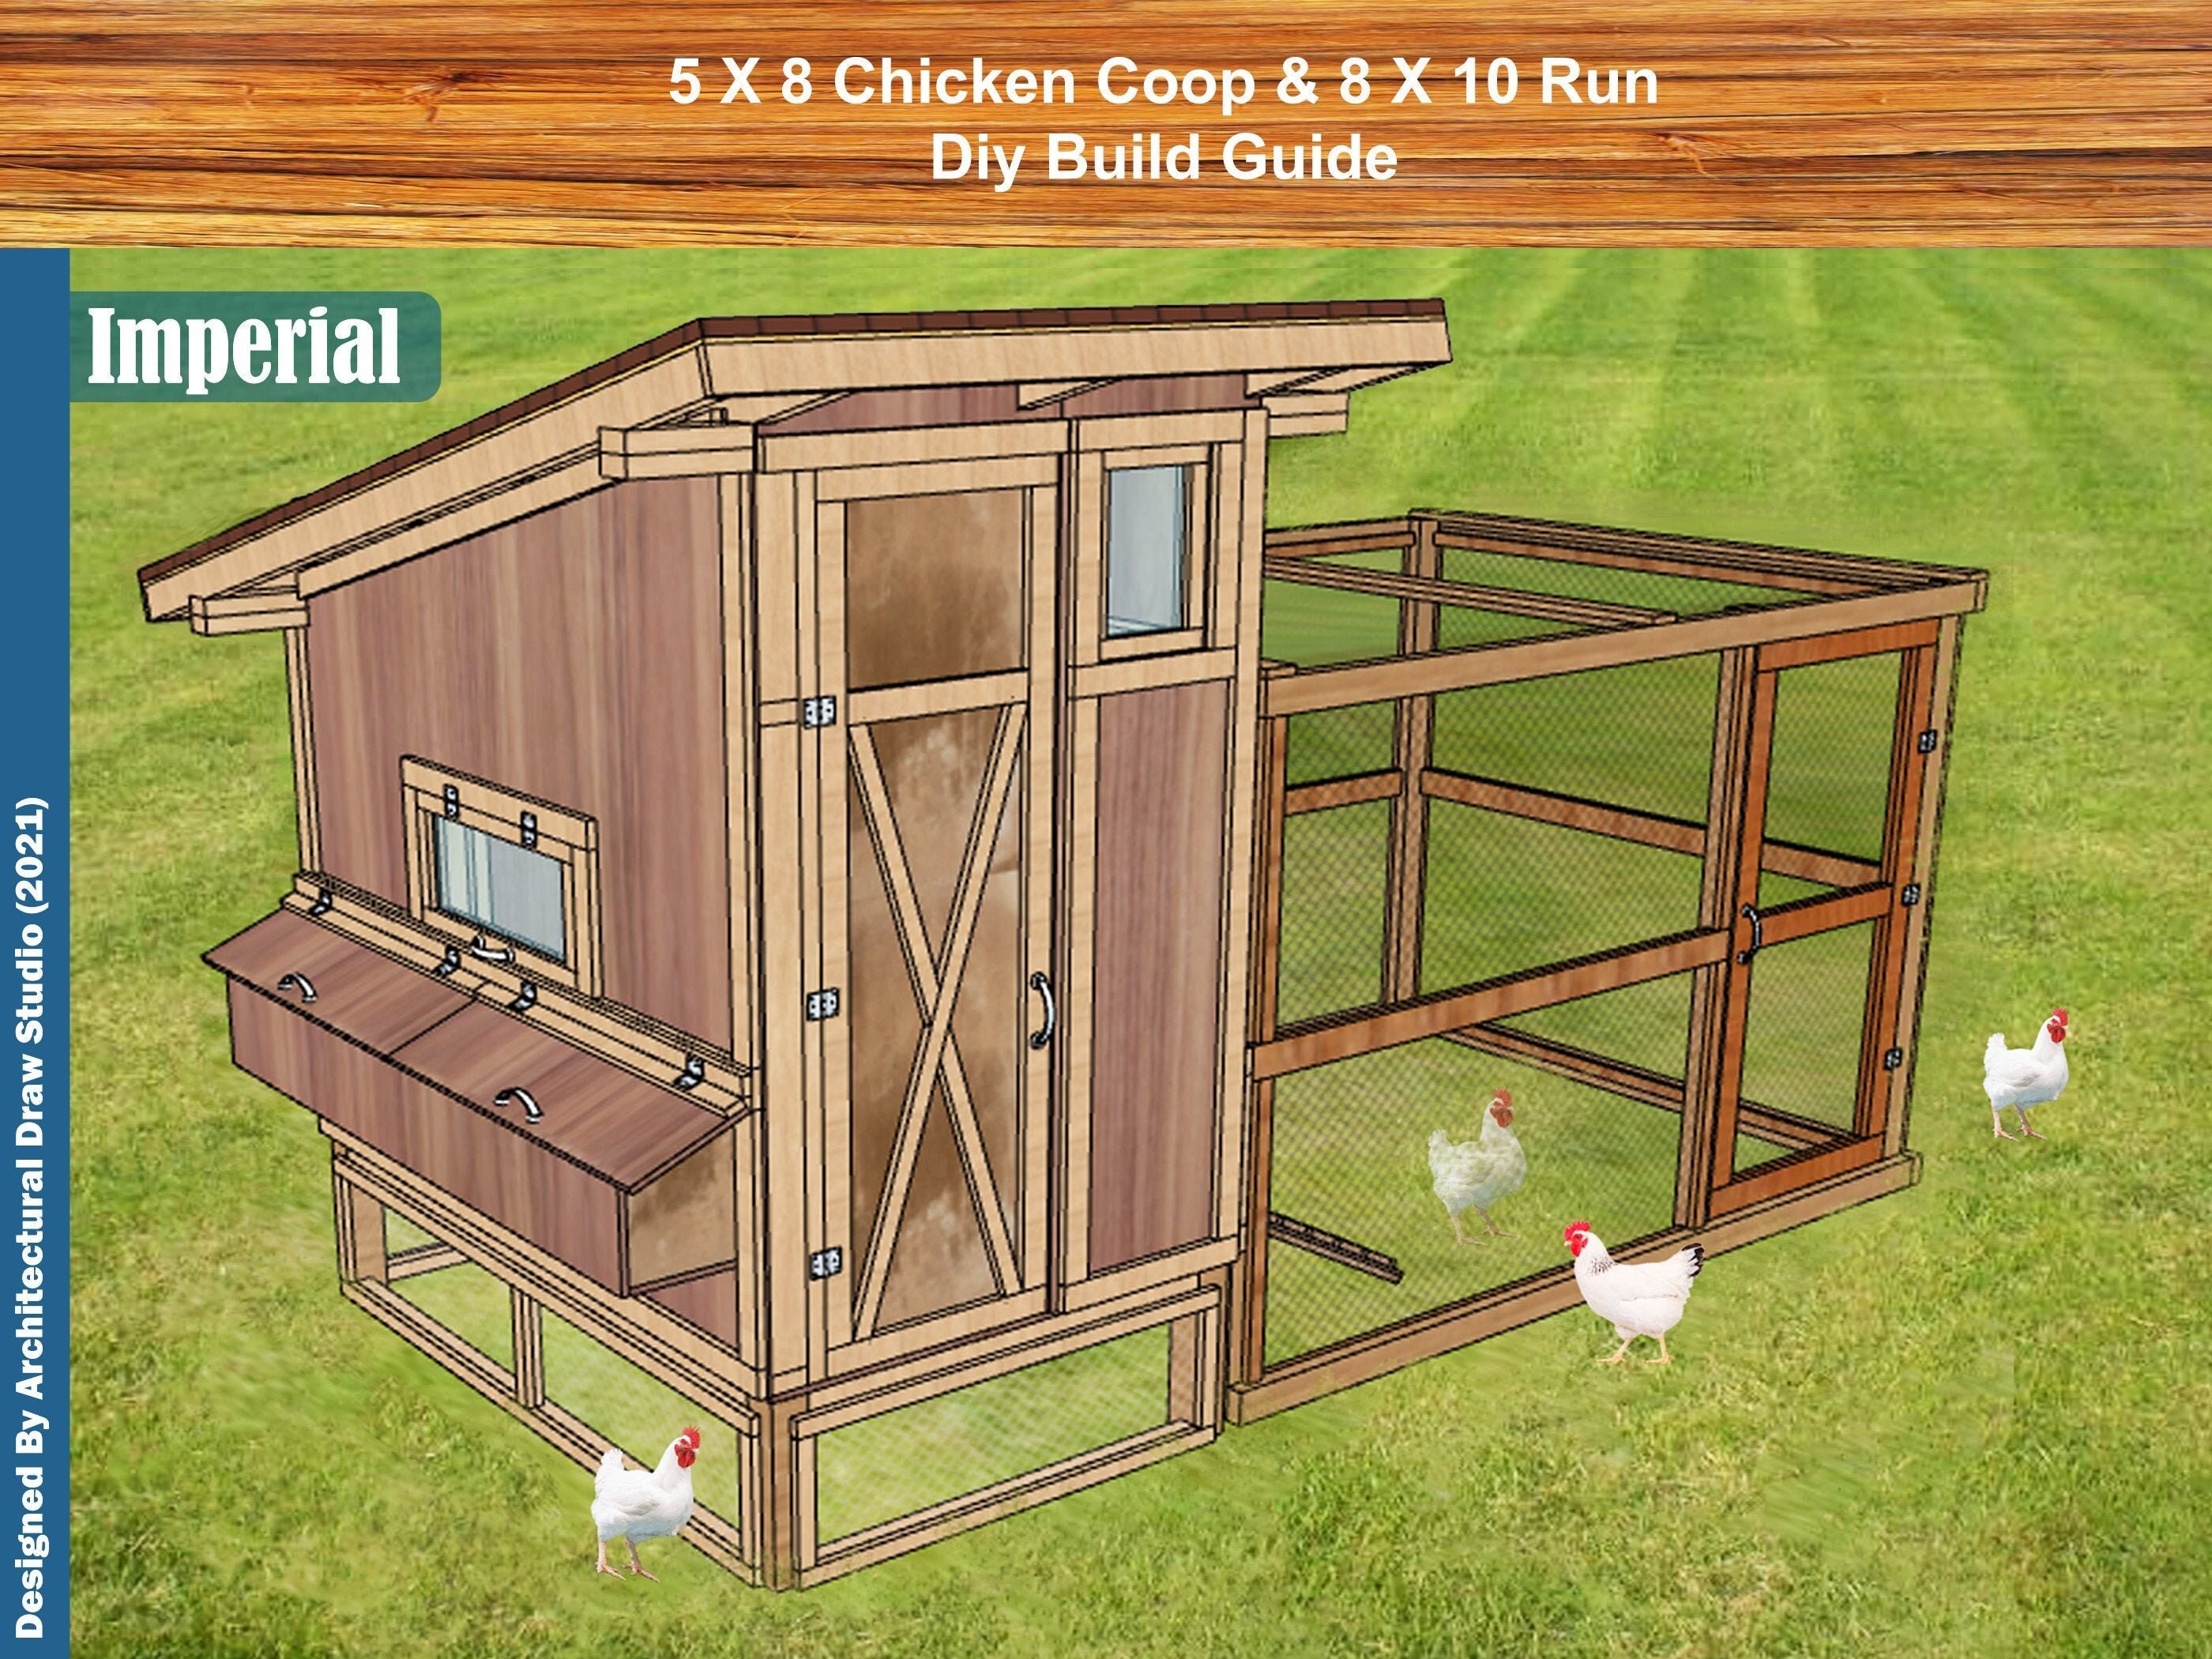 Chicken Coop With Run Plans DIY Build Guide Simple Chicken - Il Fullxfull.3284602176 1mjq